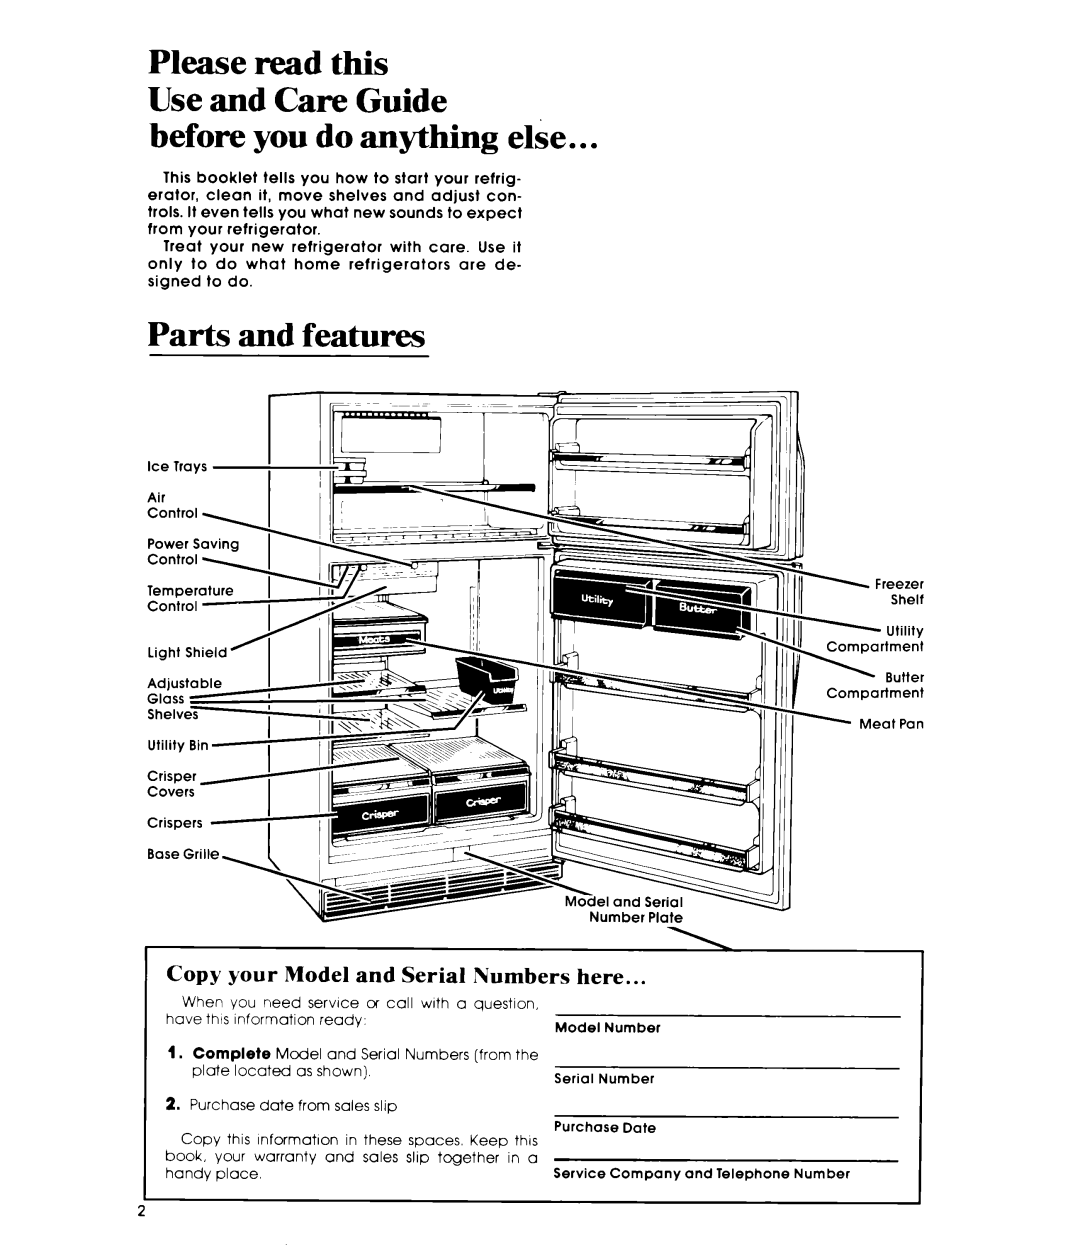 Whirlpool ET22ZK manual before you do anything else, Parts and features, Please read this Use and Care Guide 